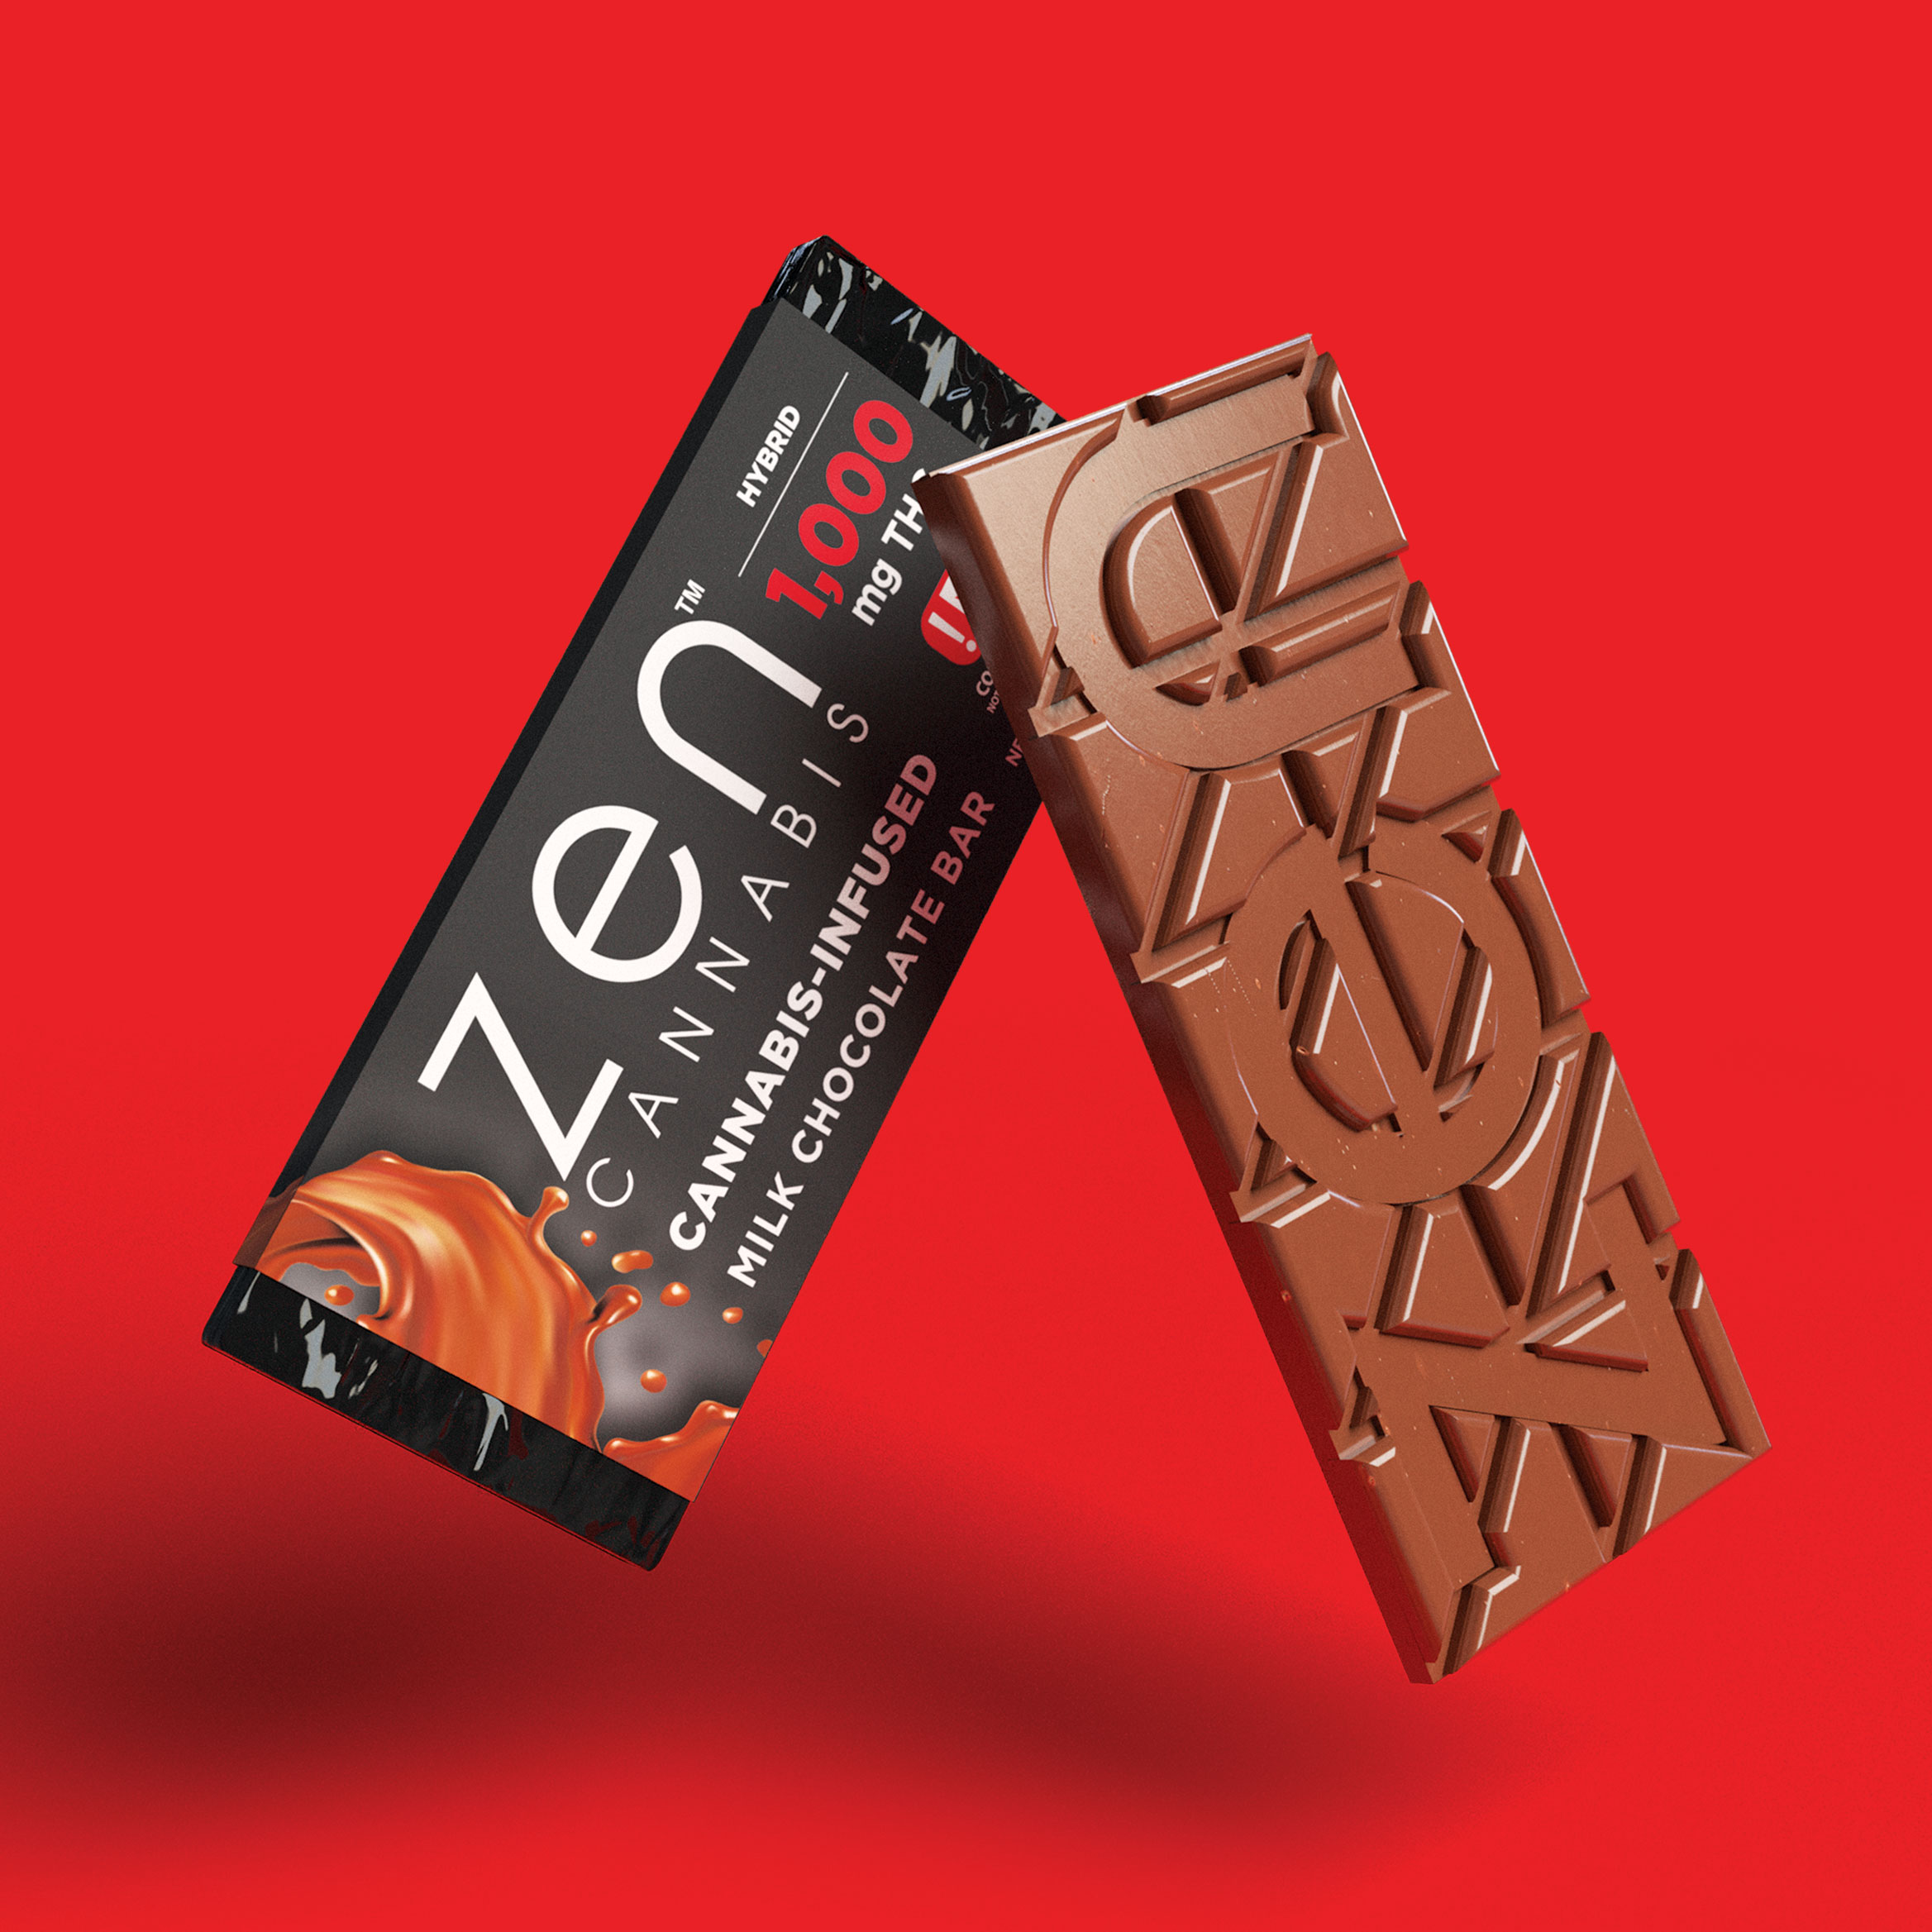 MILK CHOCOLATE - HYBRID
A classically sweet and creamy milk chocolate bar that will melt your worries away while it melts in your mouth.
1.55oz (43g)